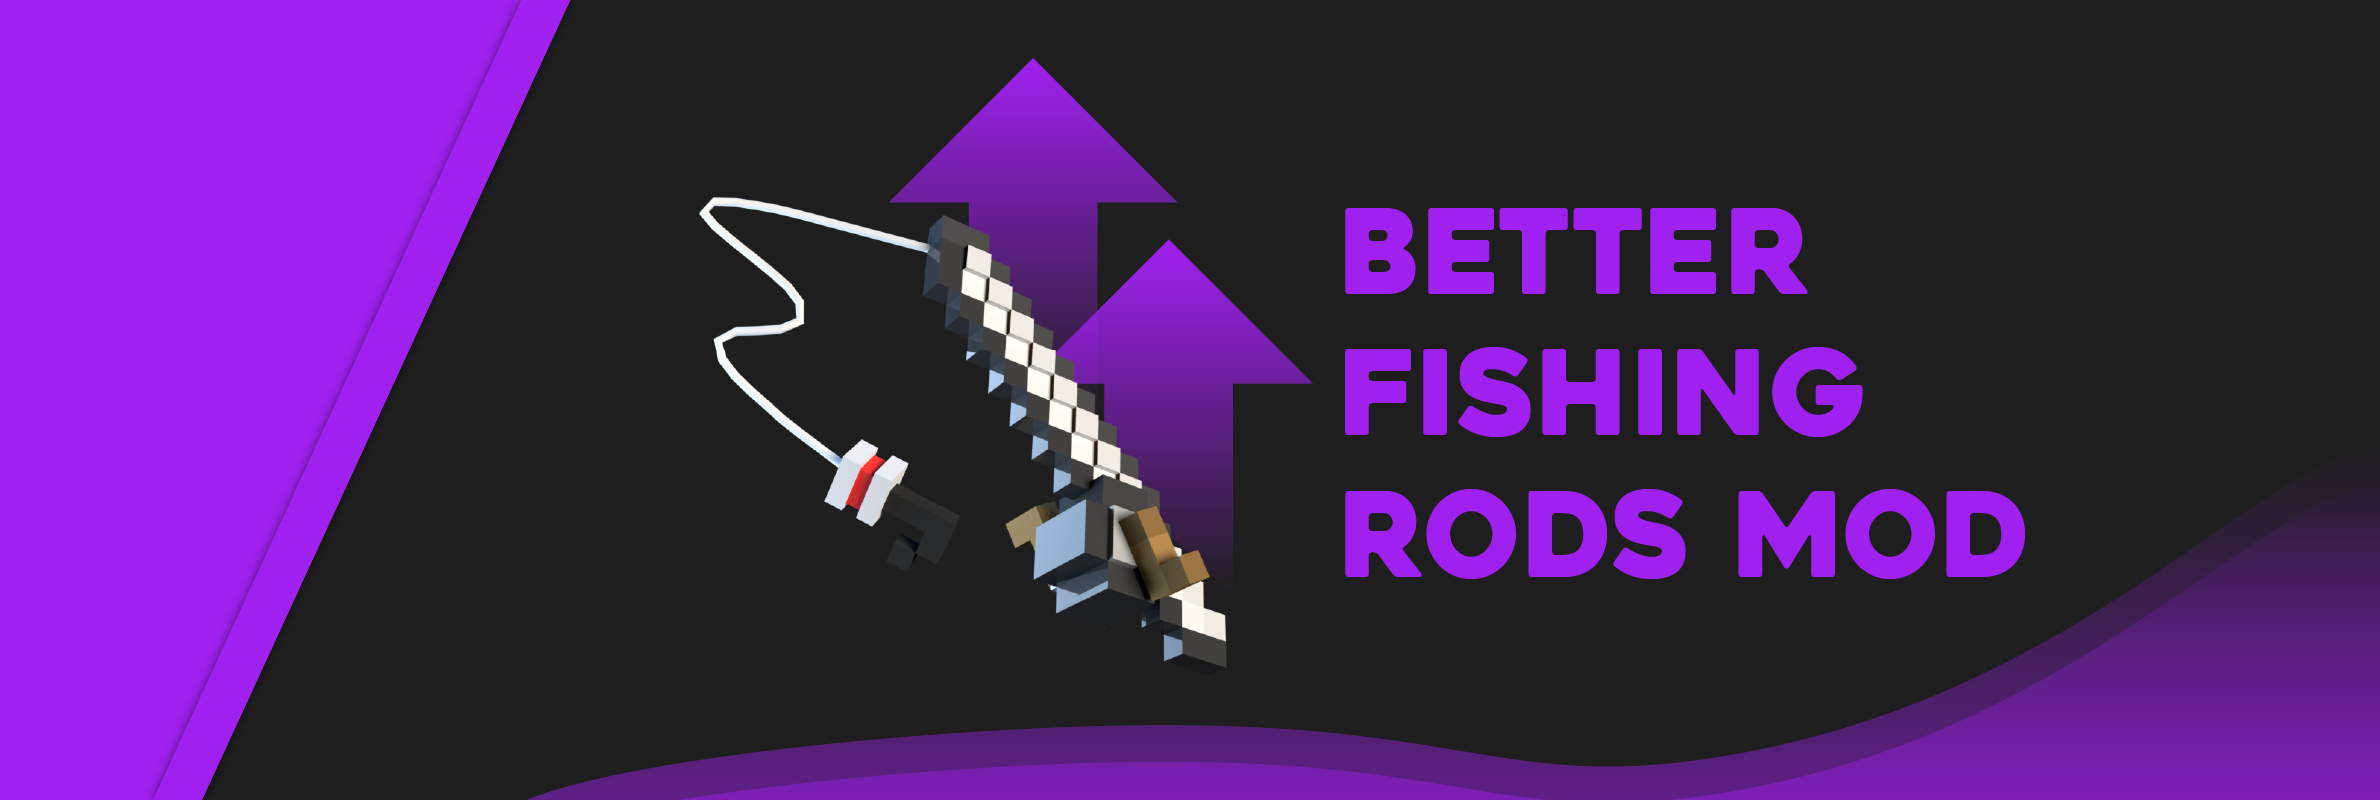 Better Fishing Rods - Minecraft Mods - CurseForge